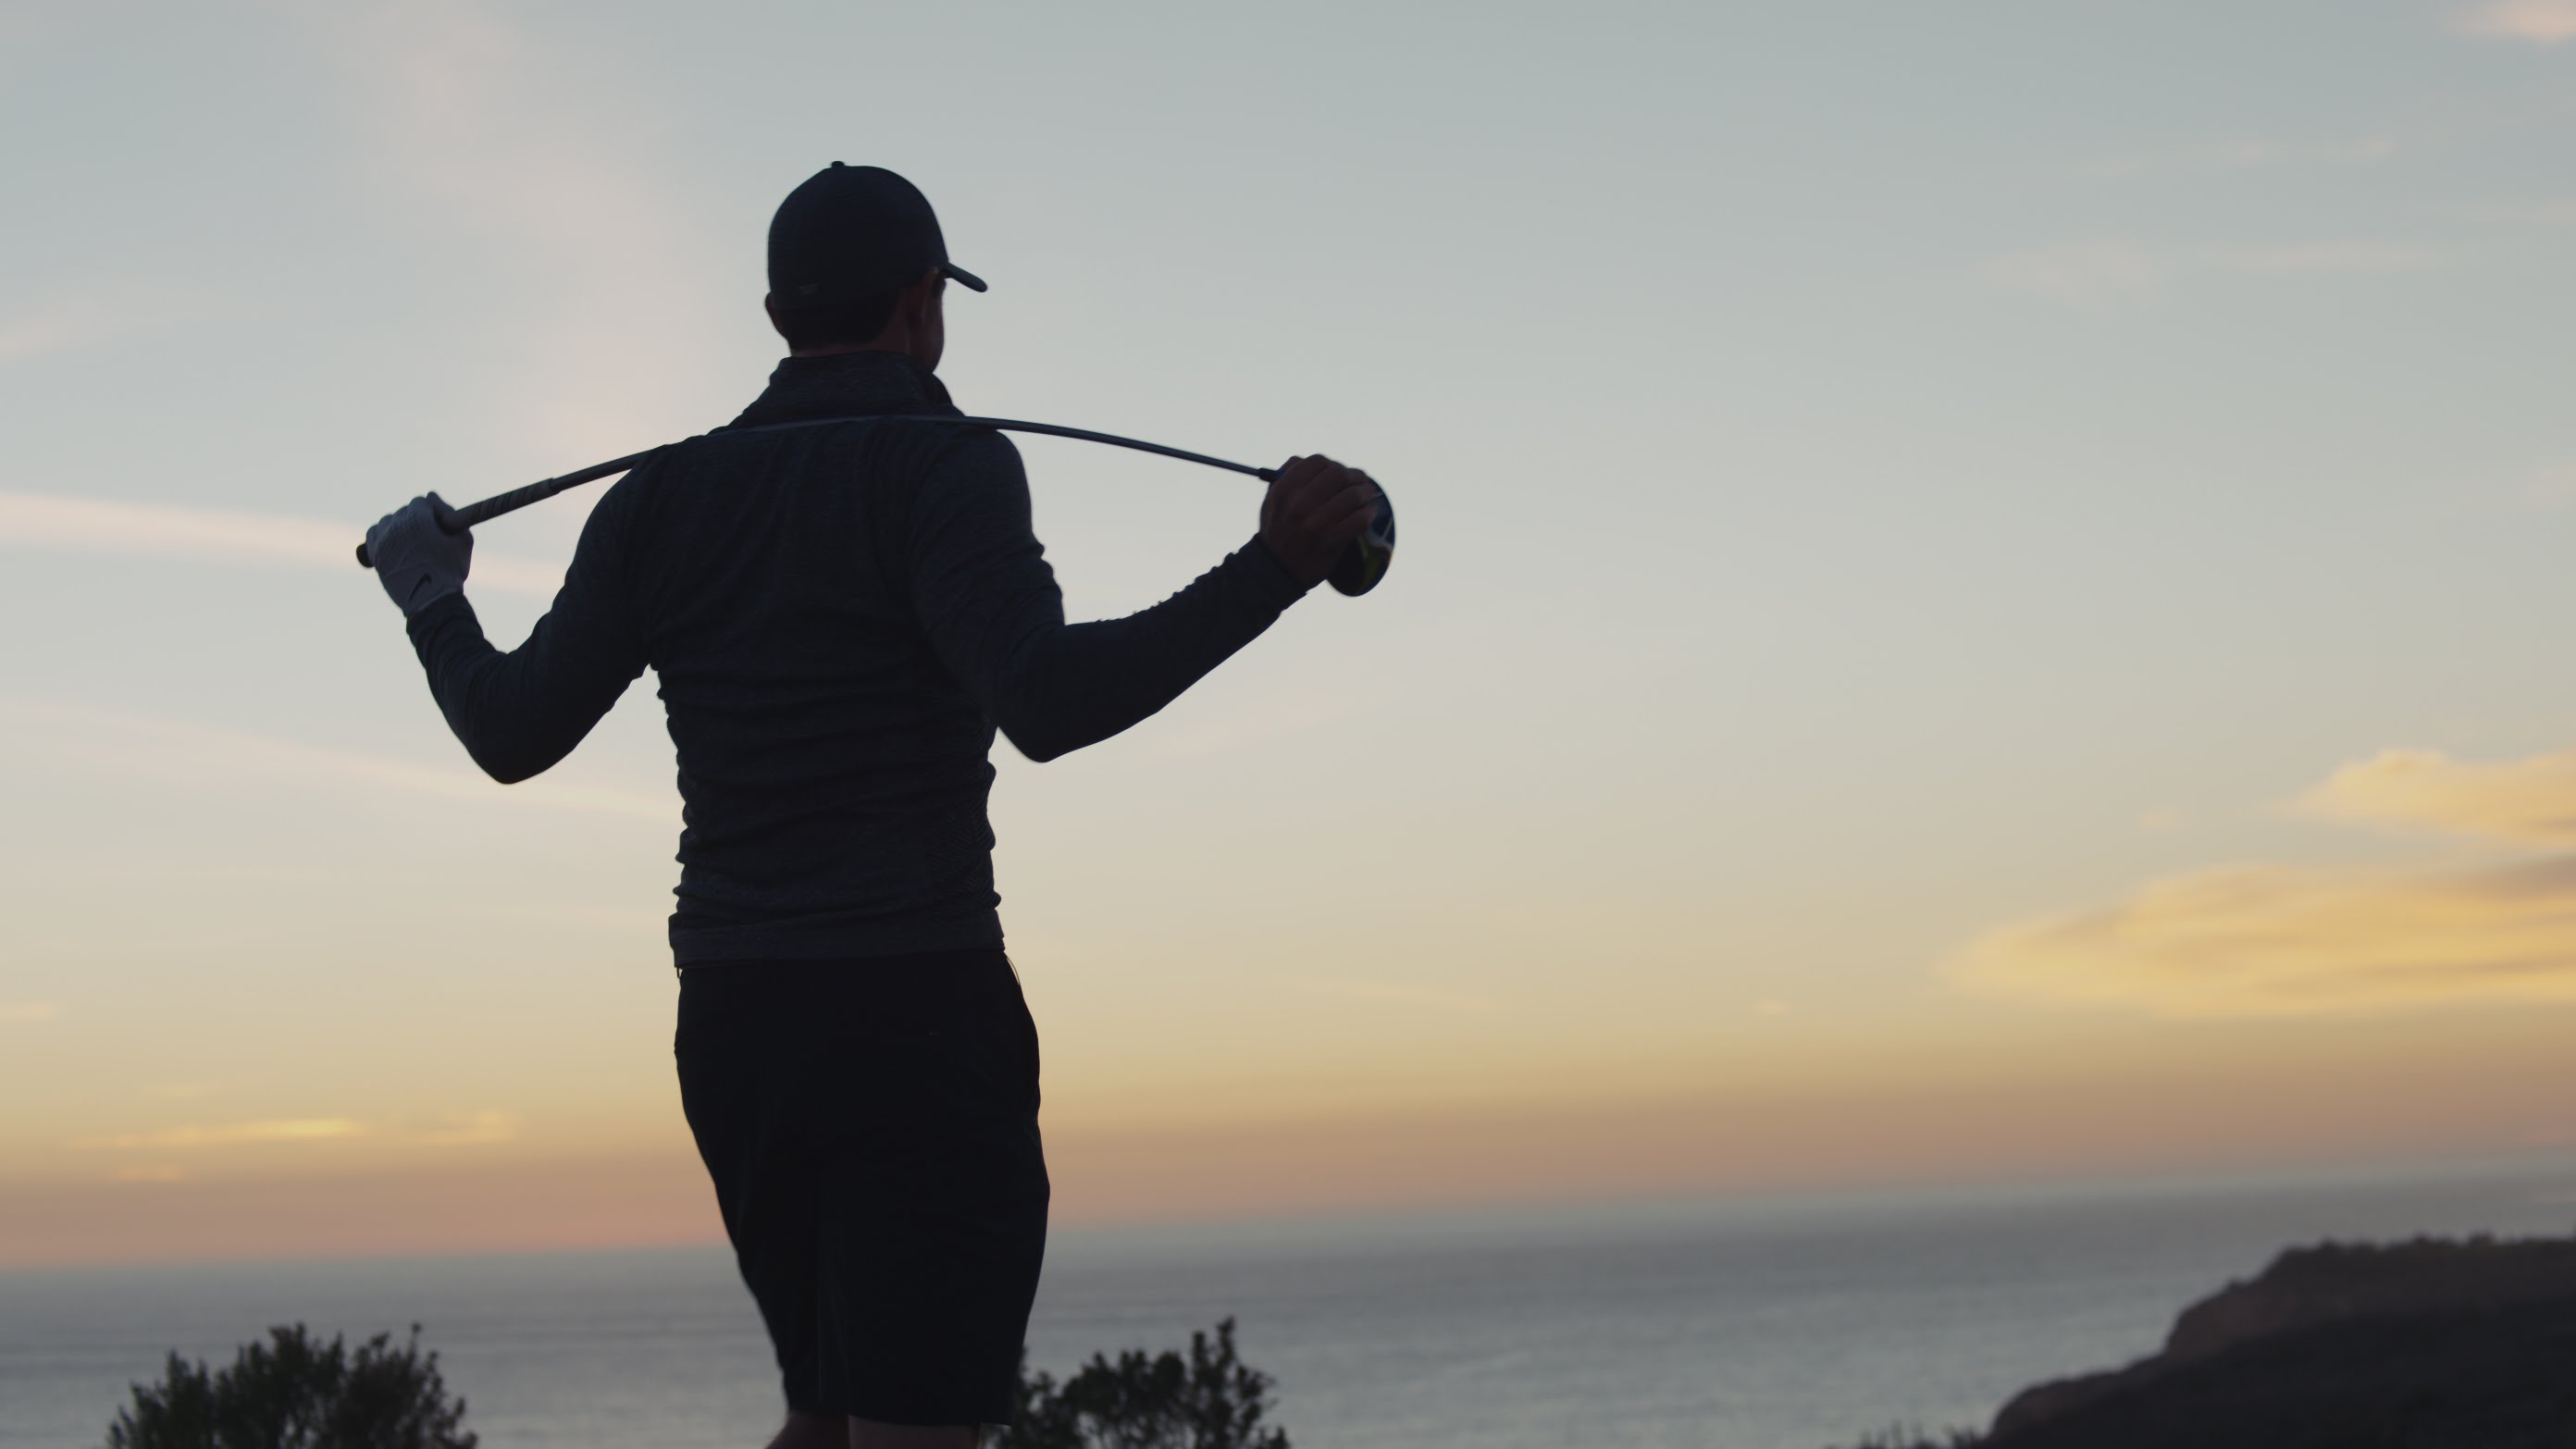 Rory McIlroy's new Nike commercial is 